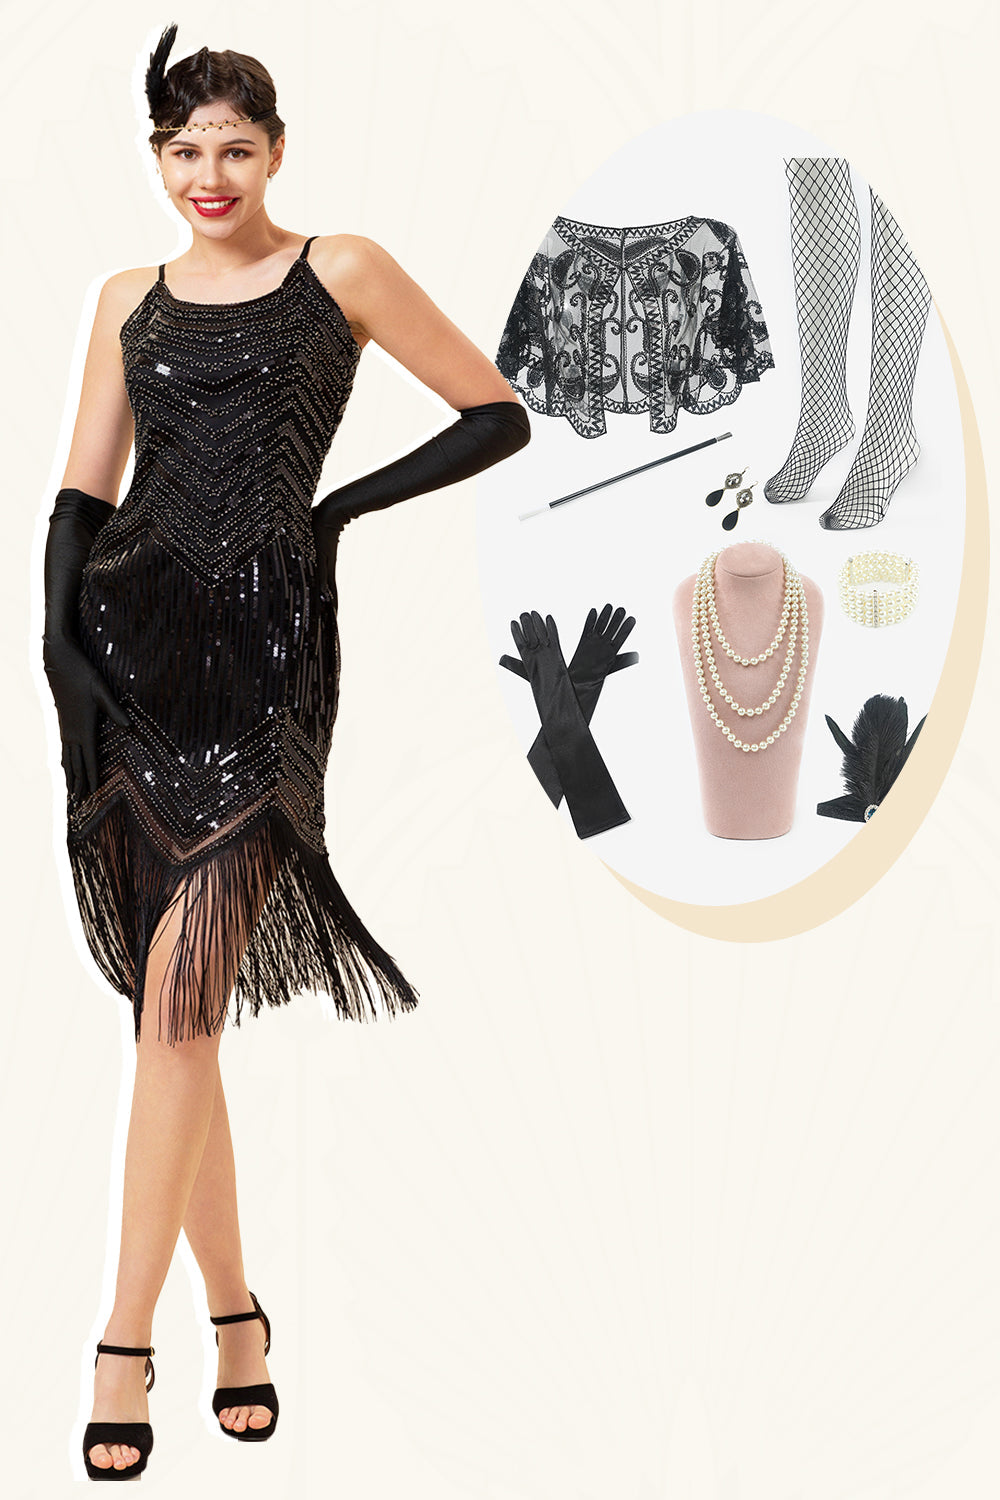 Spaghetti Straps Sequin Fringes Flapper Dress with 1920s Accessories Set